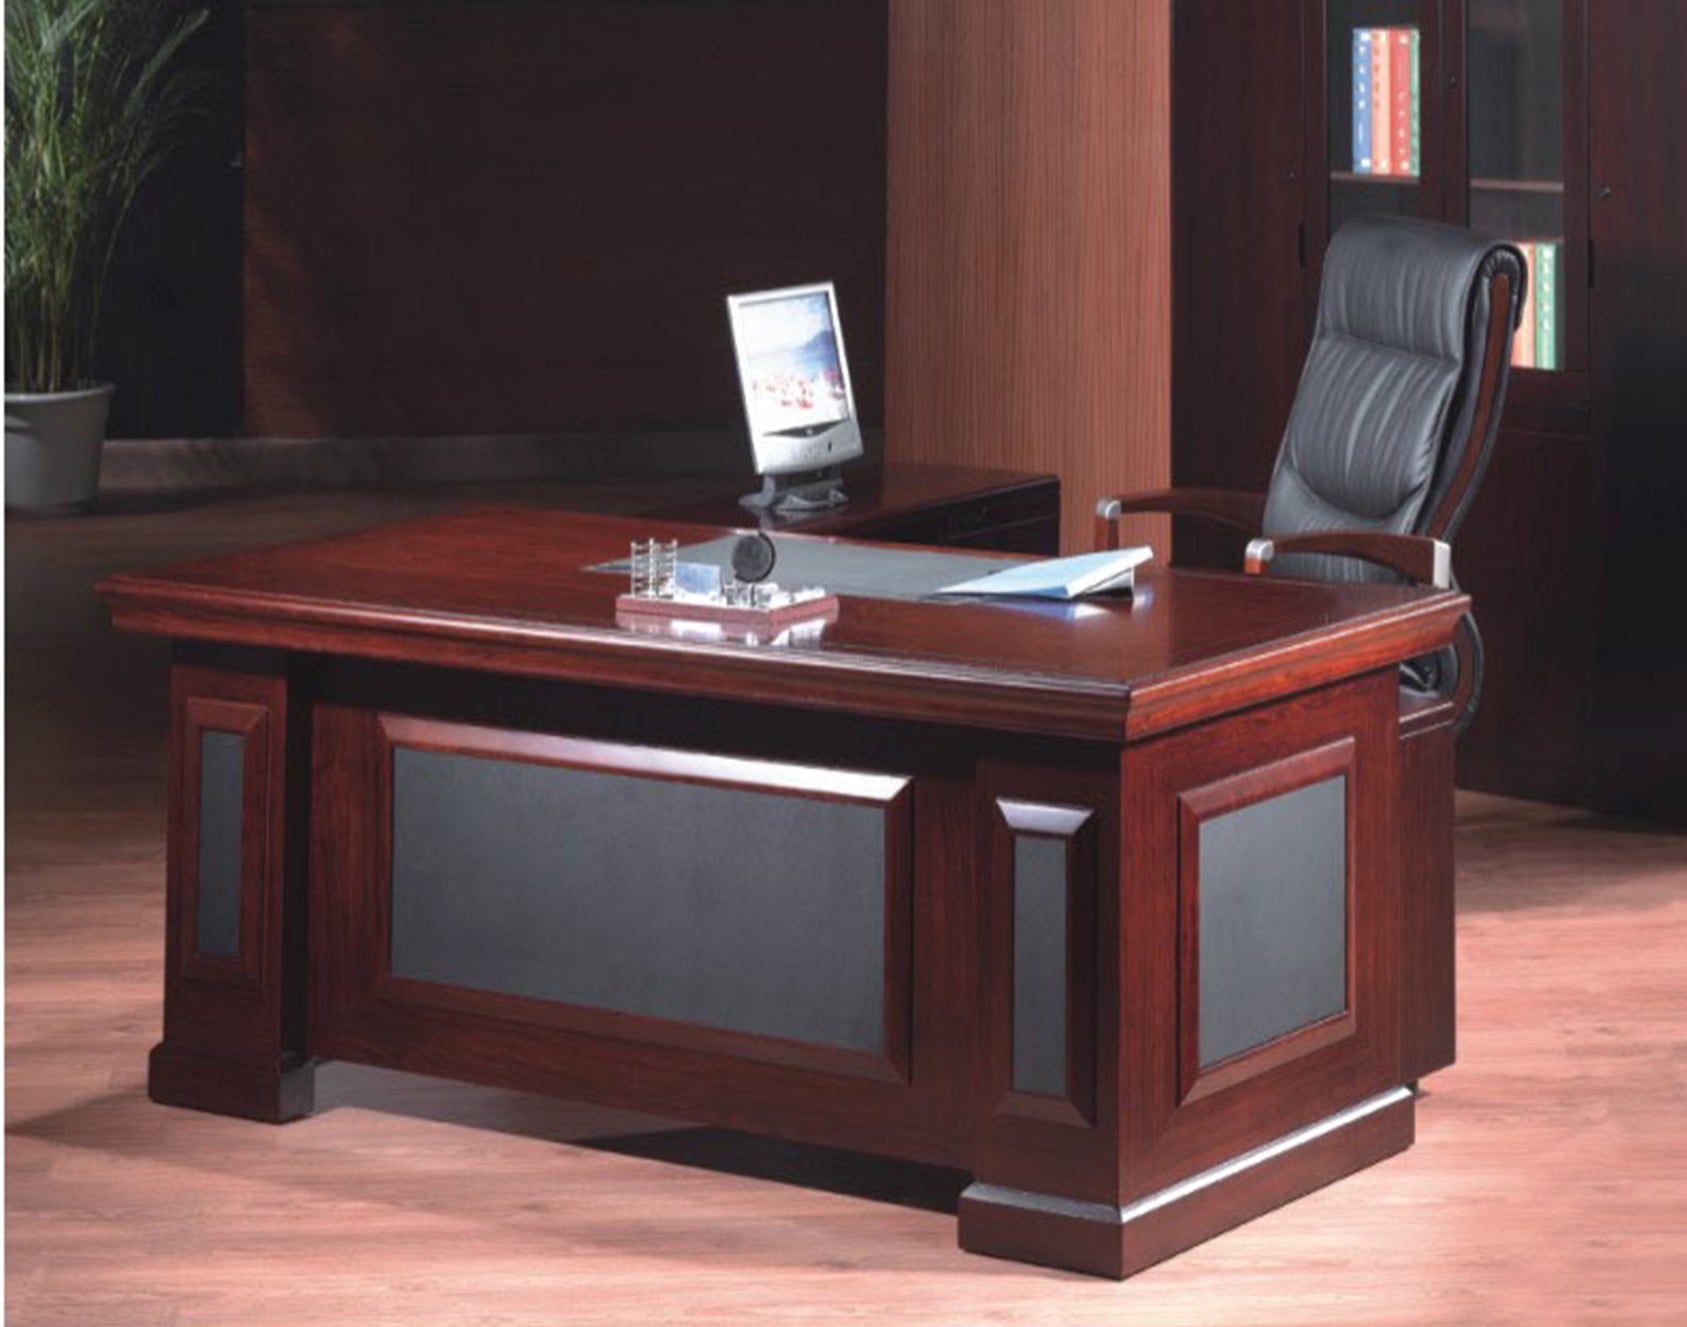 Mahogany Executive Desk With Leather Detailing - With Pedestal and Return - 1819 North Yorkshire